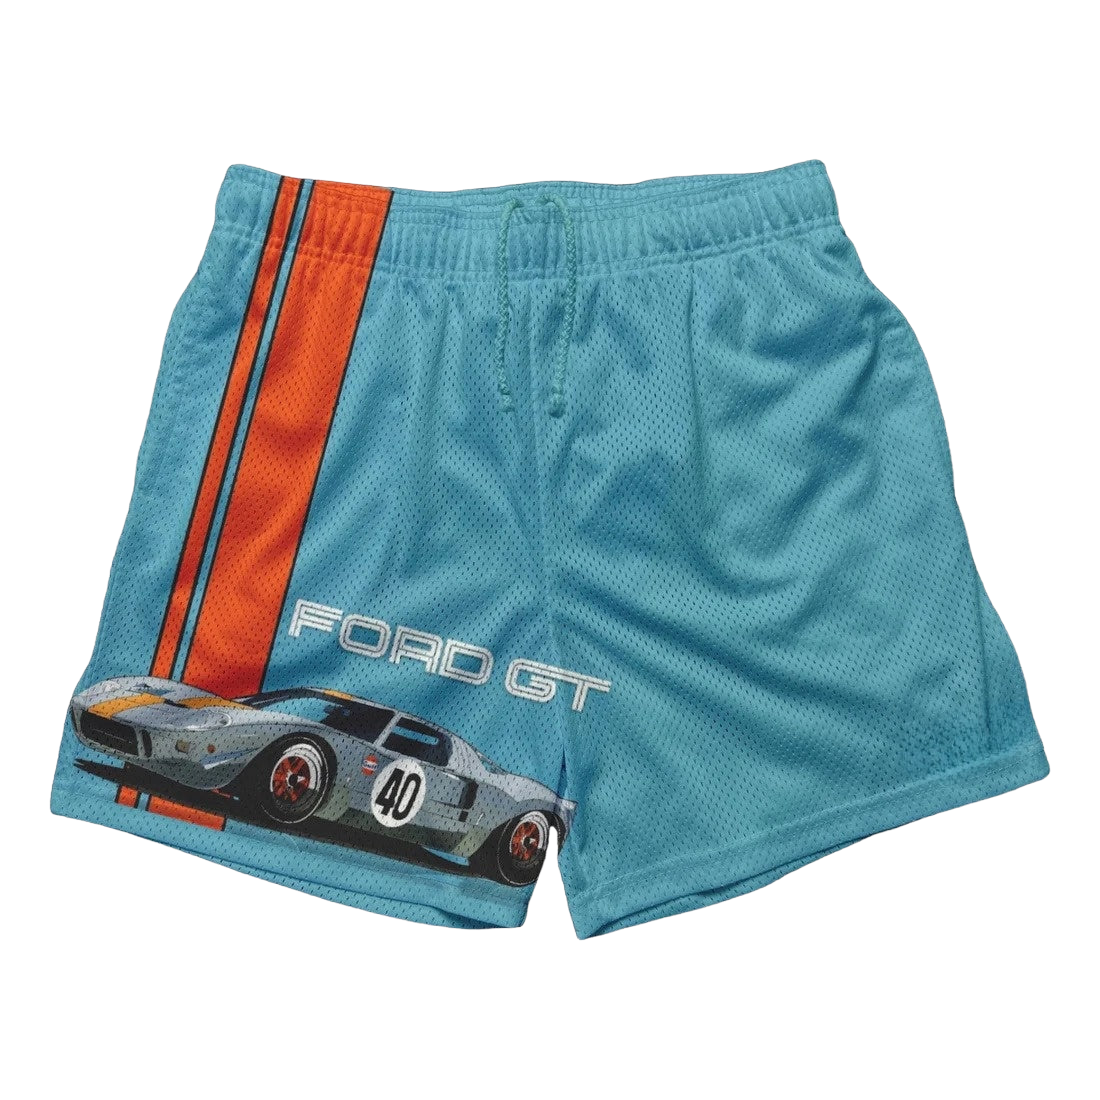 a blue shorts with a picture of a race car on it